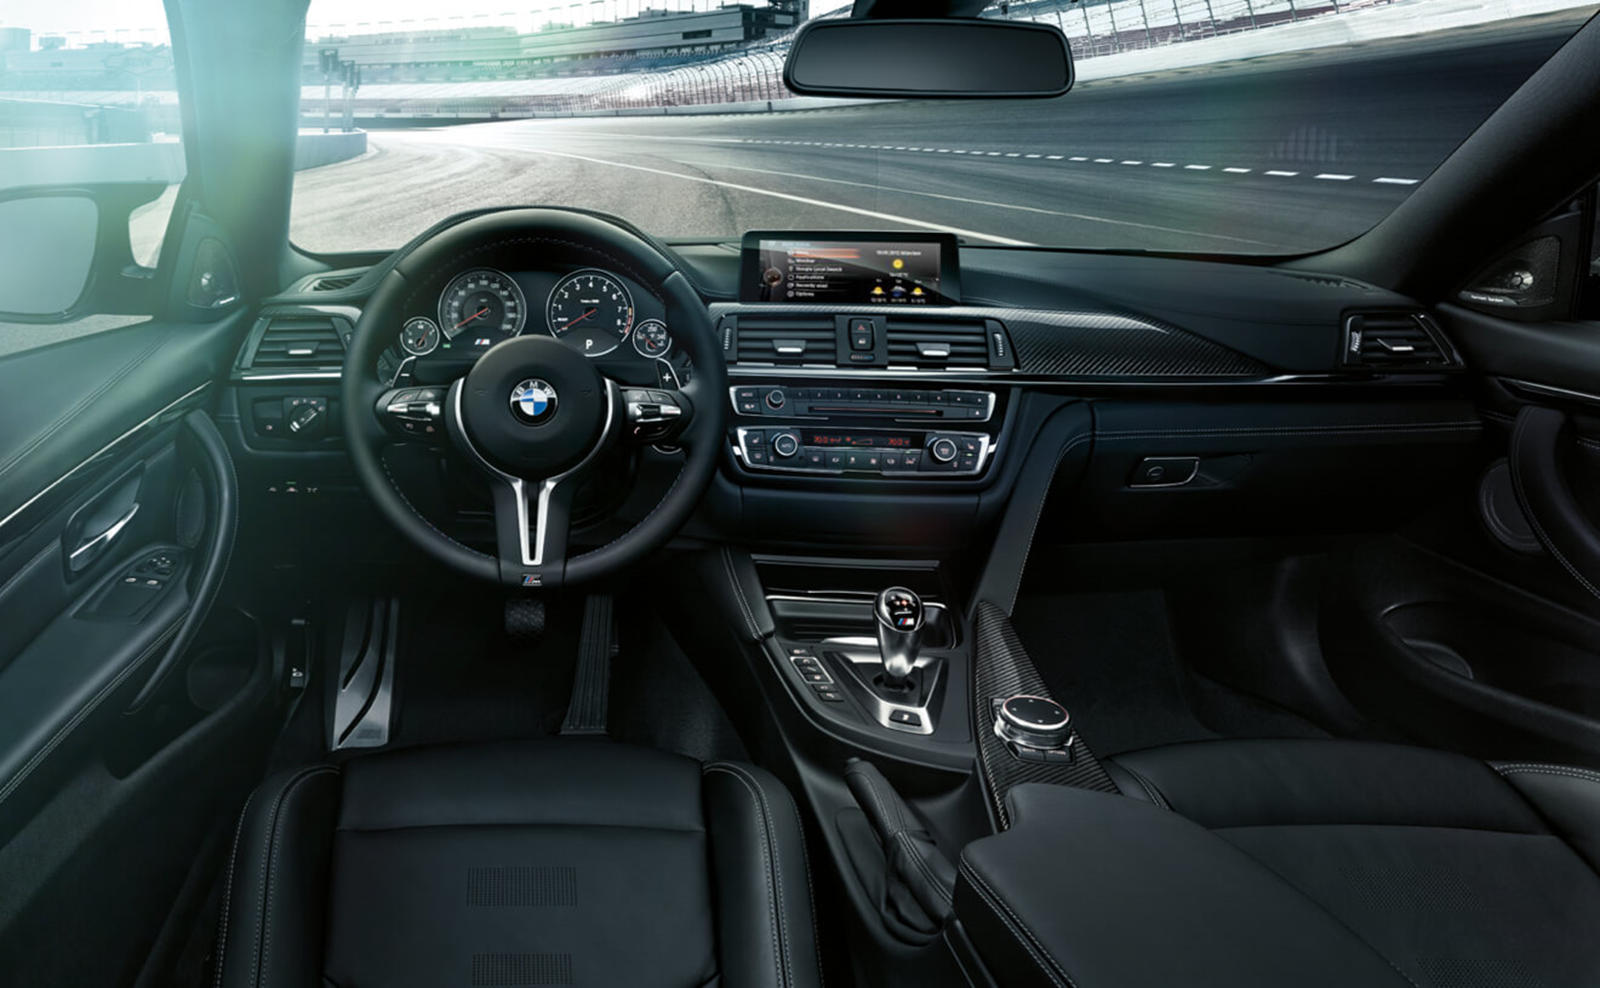 Pew Applicant in case 2017 BMW M4 Coupe Interior Photos | CarBuzz